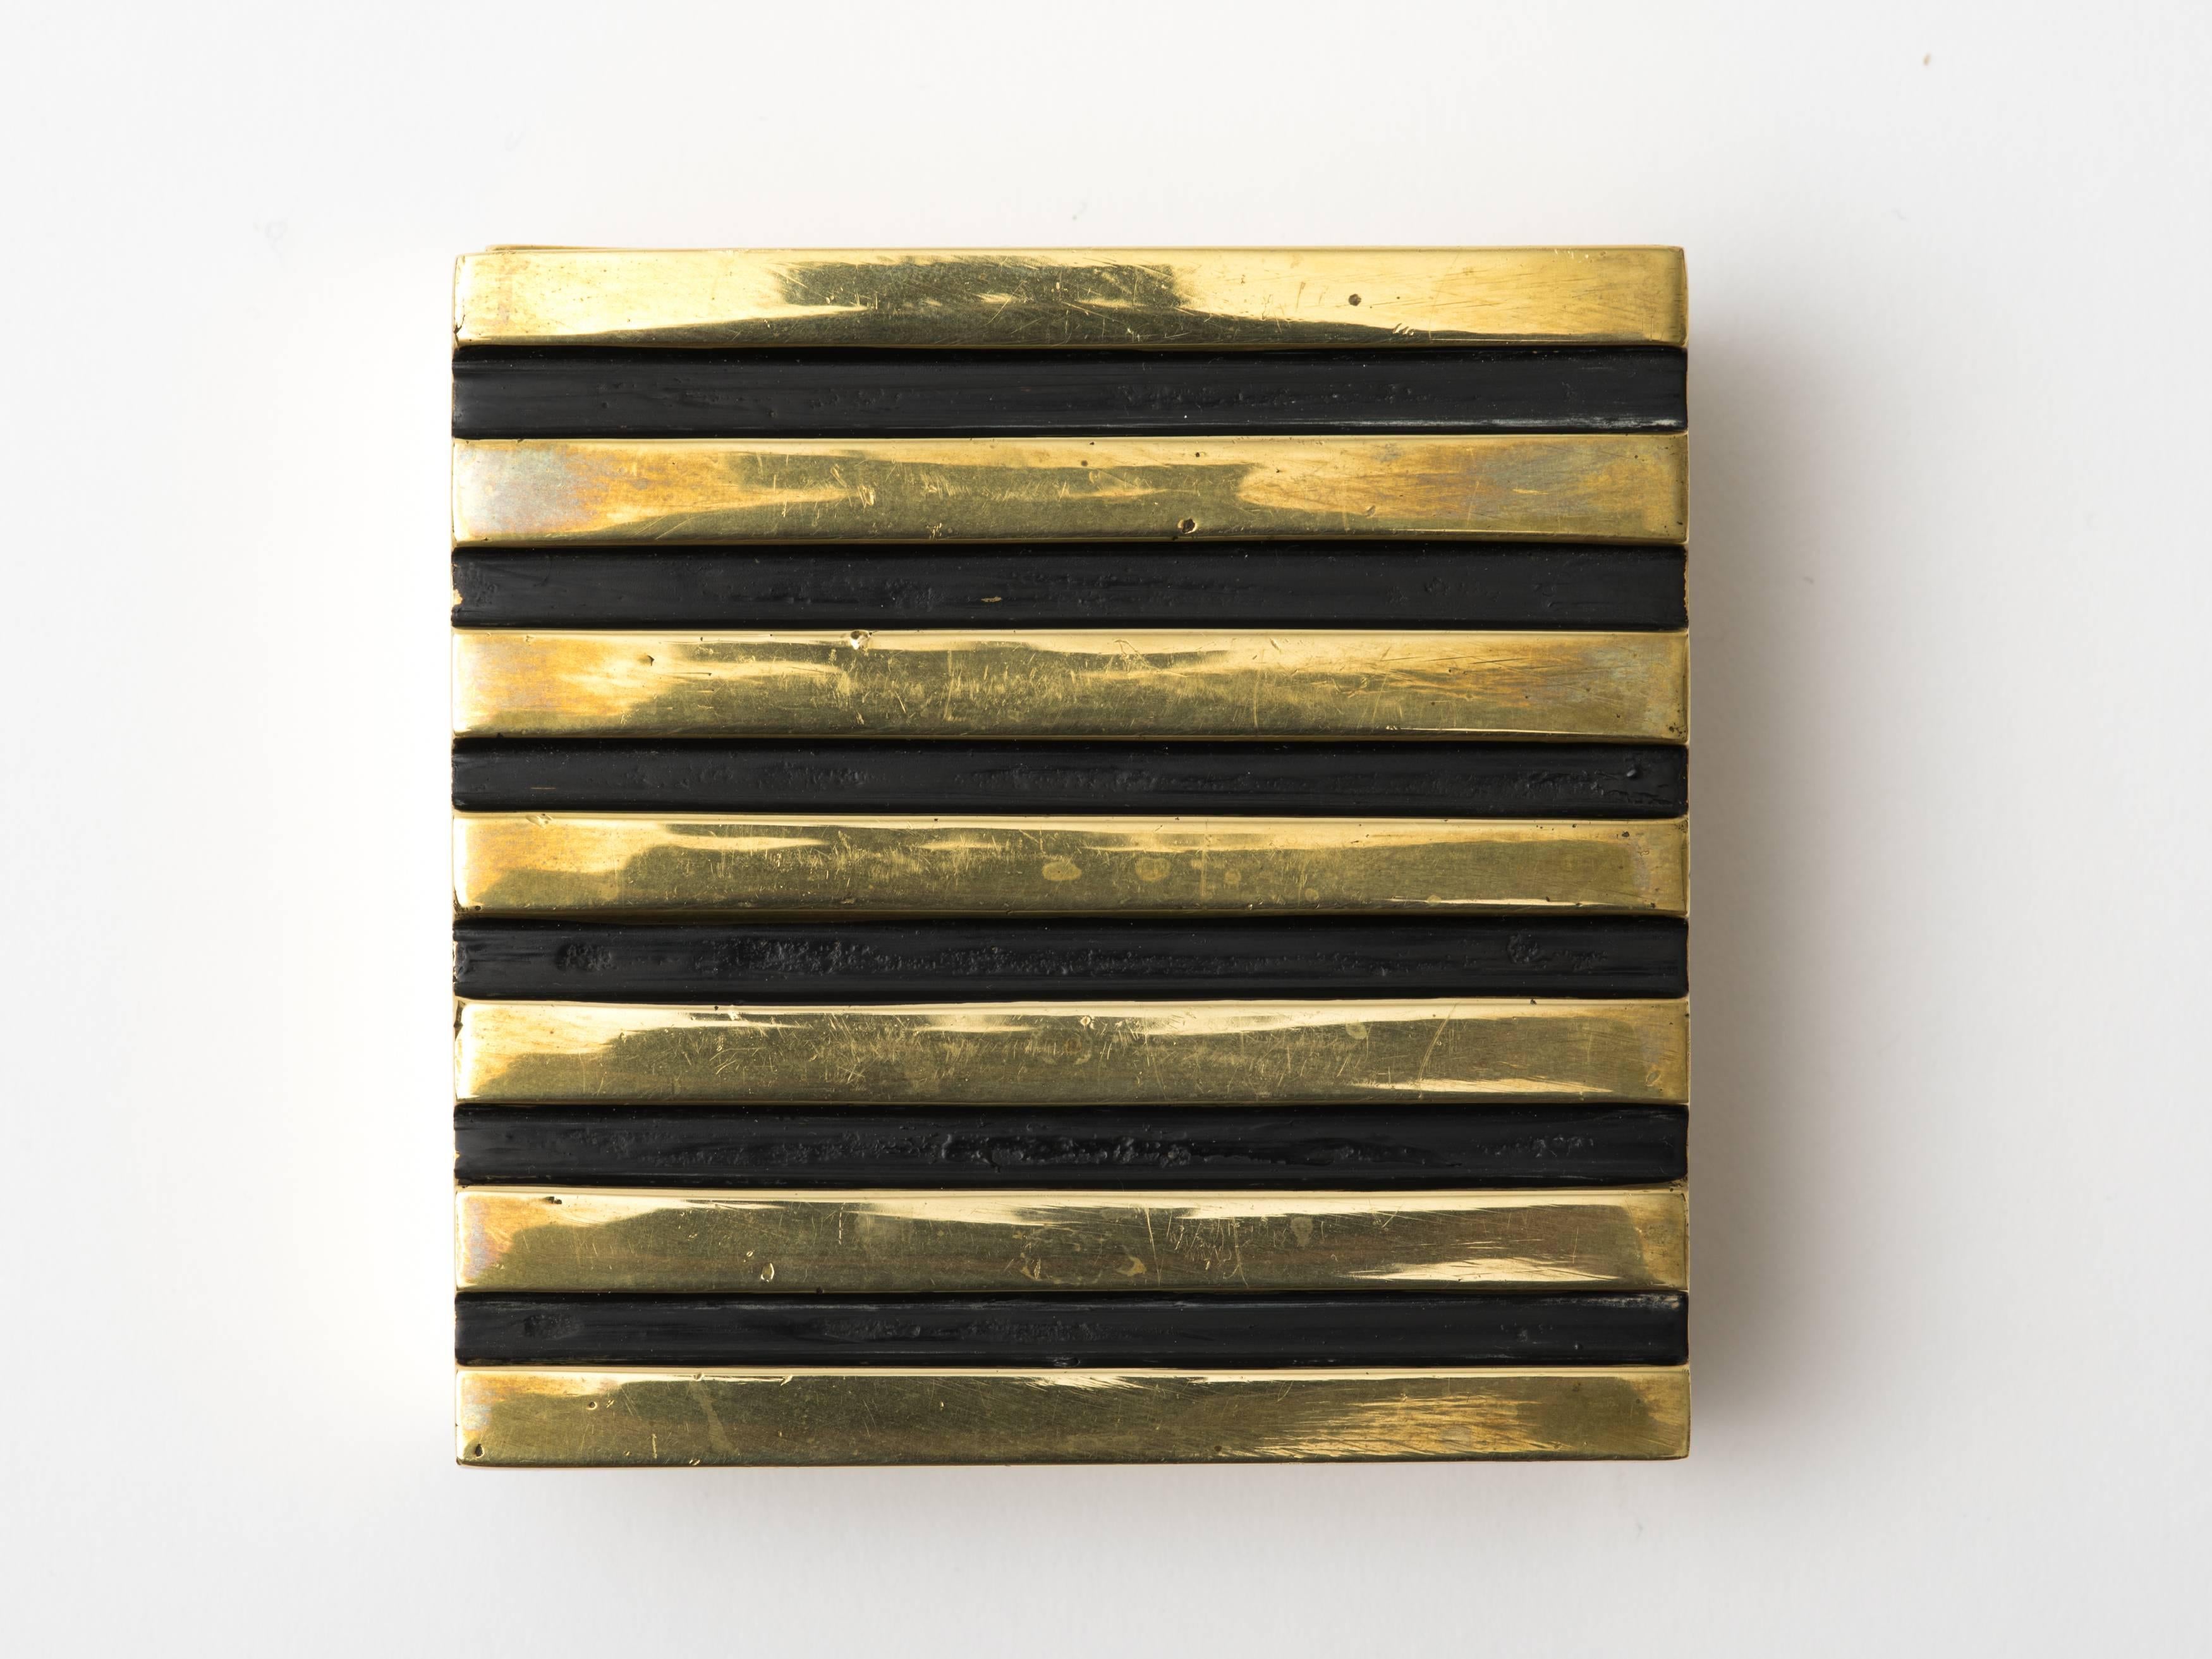 Walter Bosse for Herta Baller polished cast brass square box with patinated stripe lid, Austria, circa 1950's.